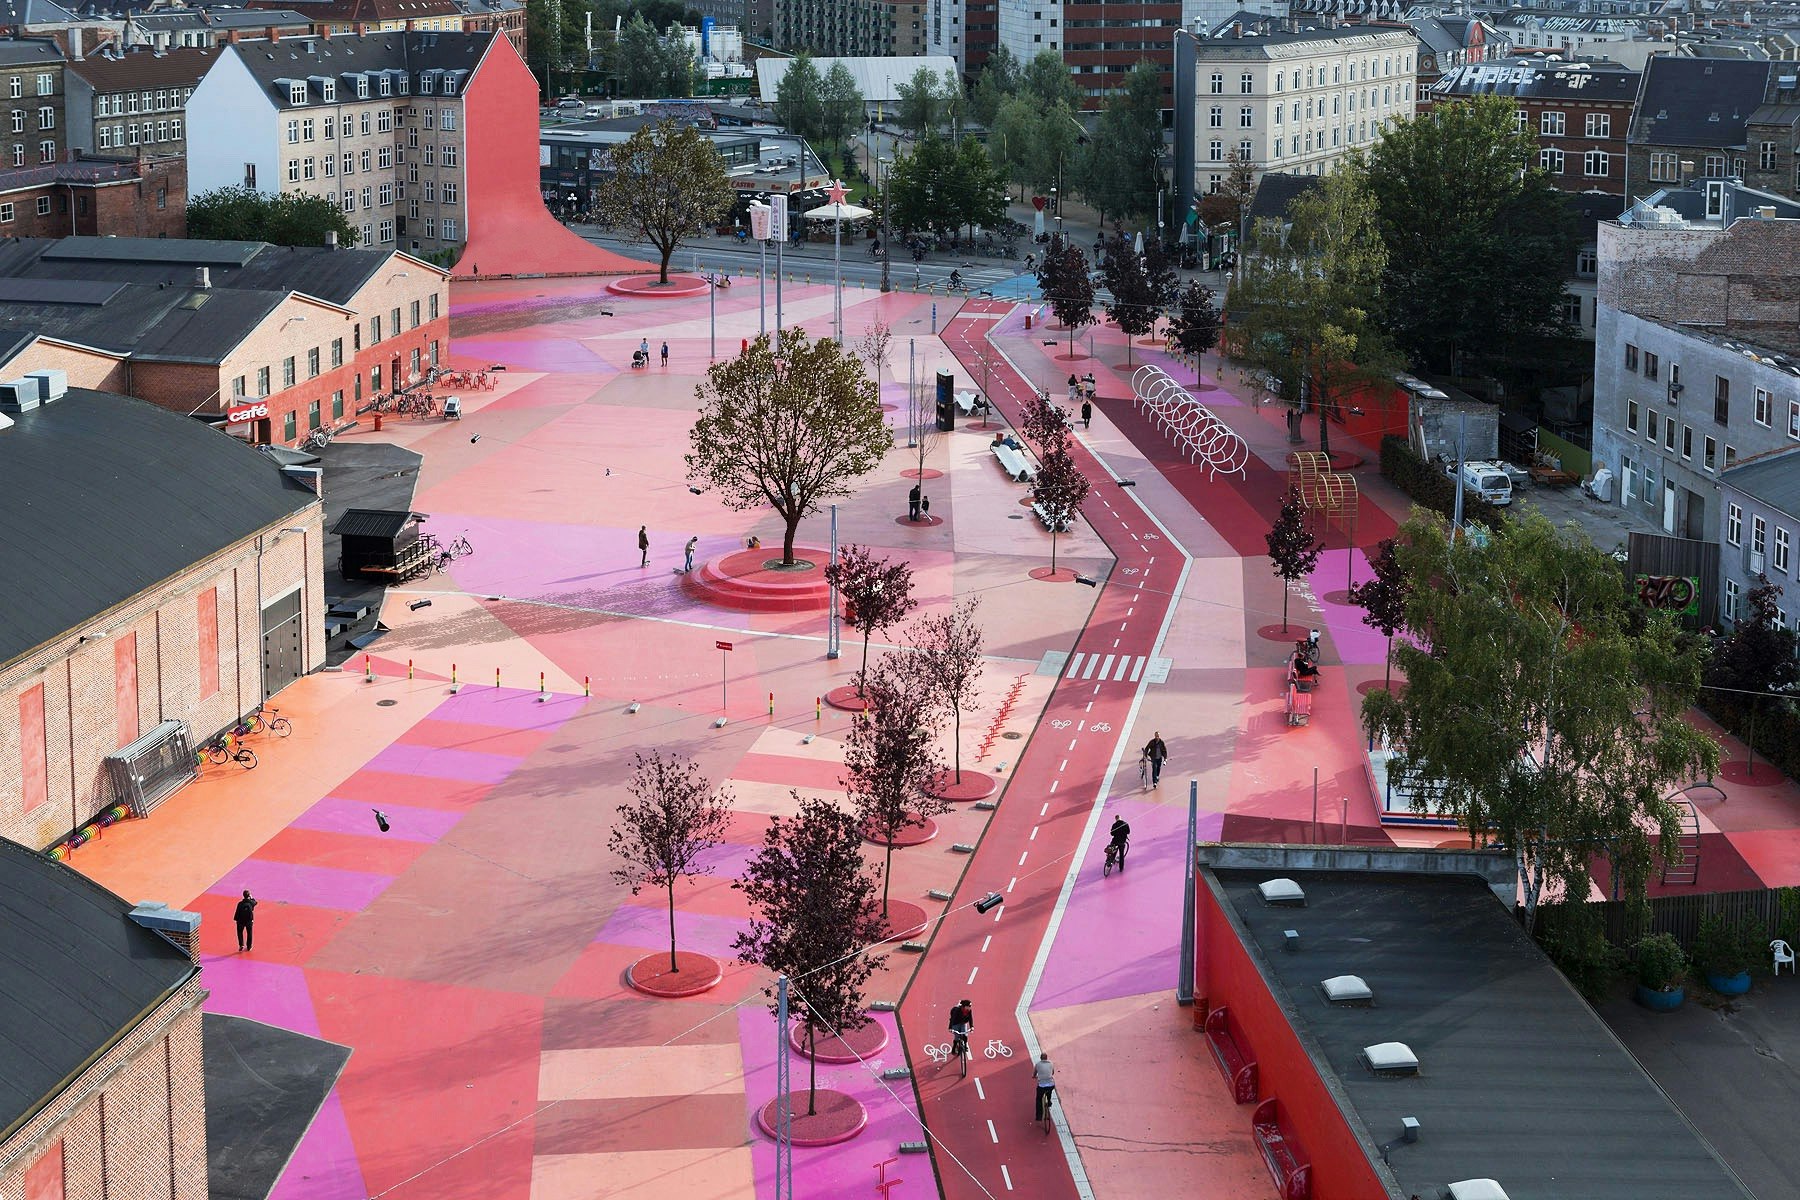 The ground is painted pink in an outdoor park, as seen from an aerial image. 